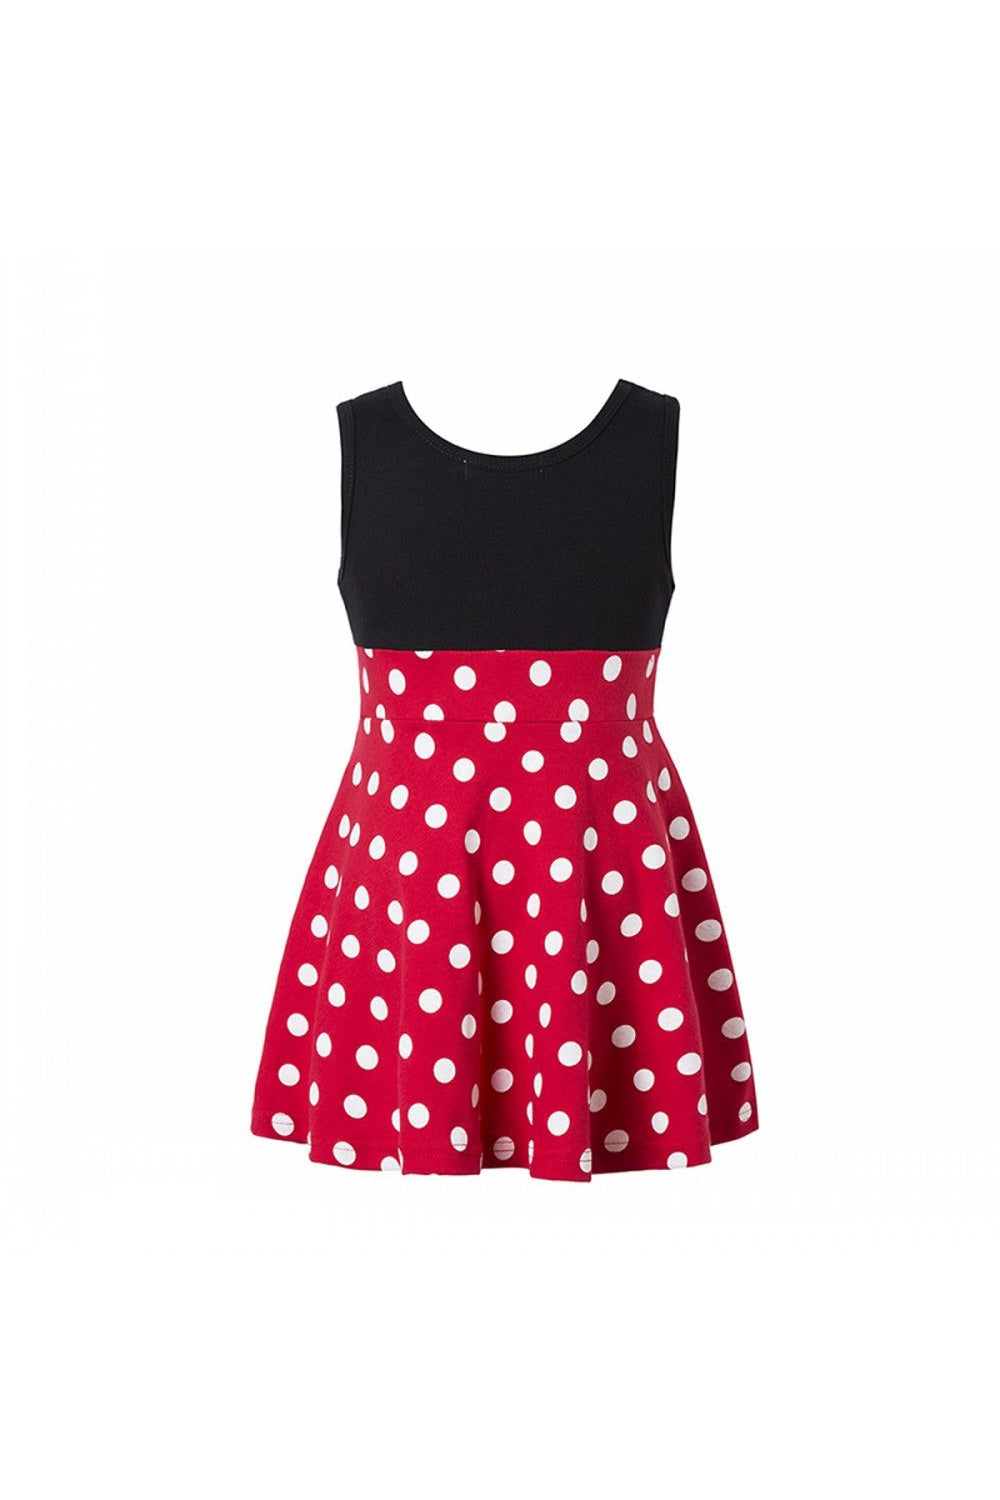 Princess inspired Fancy dresses - The Minnie